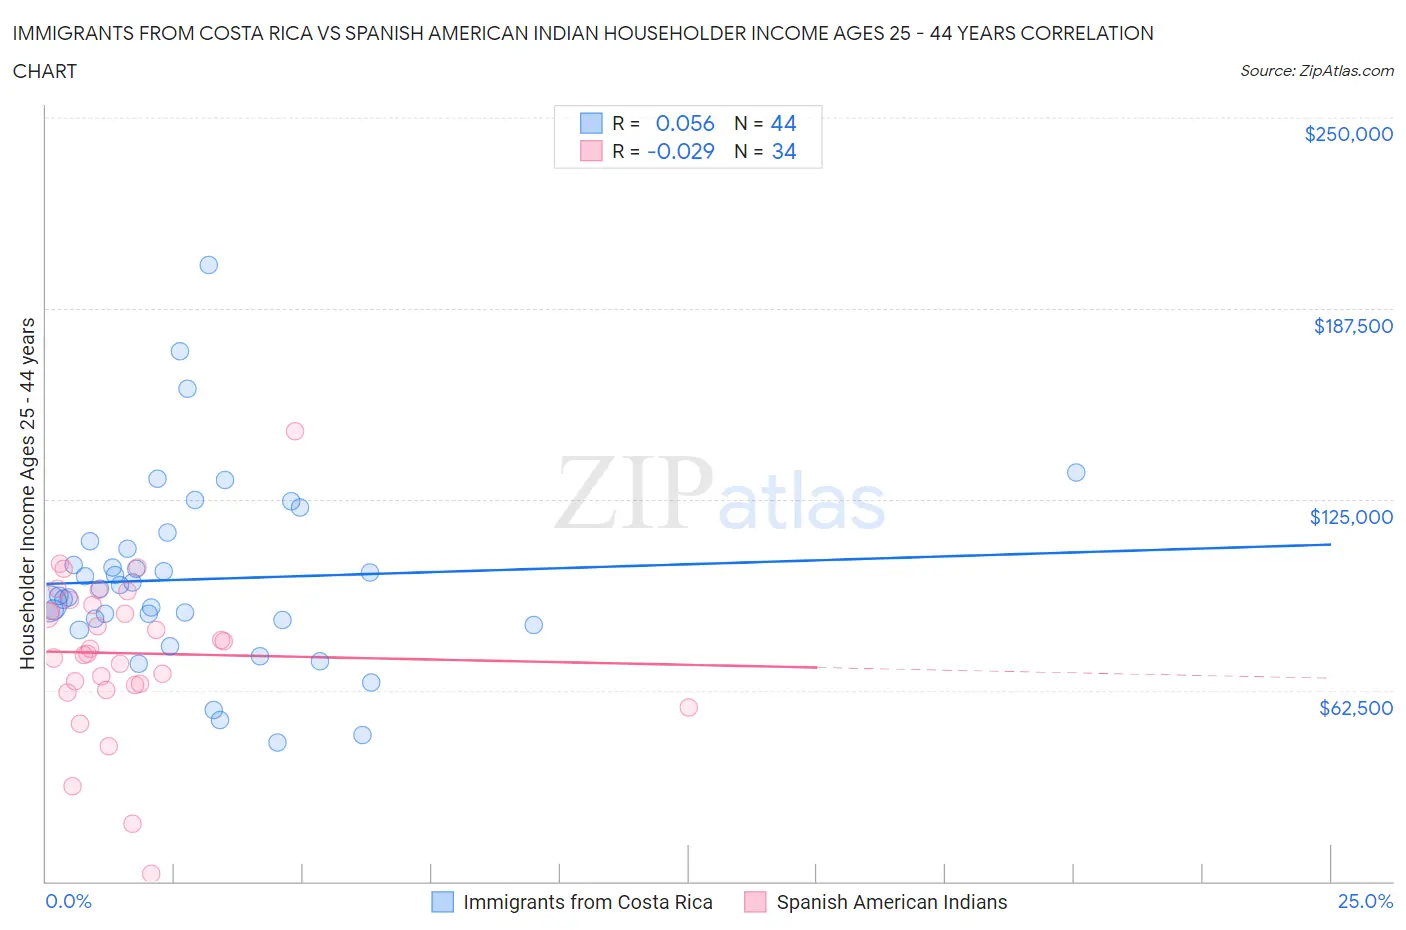 Immigrants from Costa Rica vs Spanish American Indian Householder Income Ages 25 - 44 years